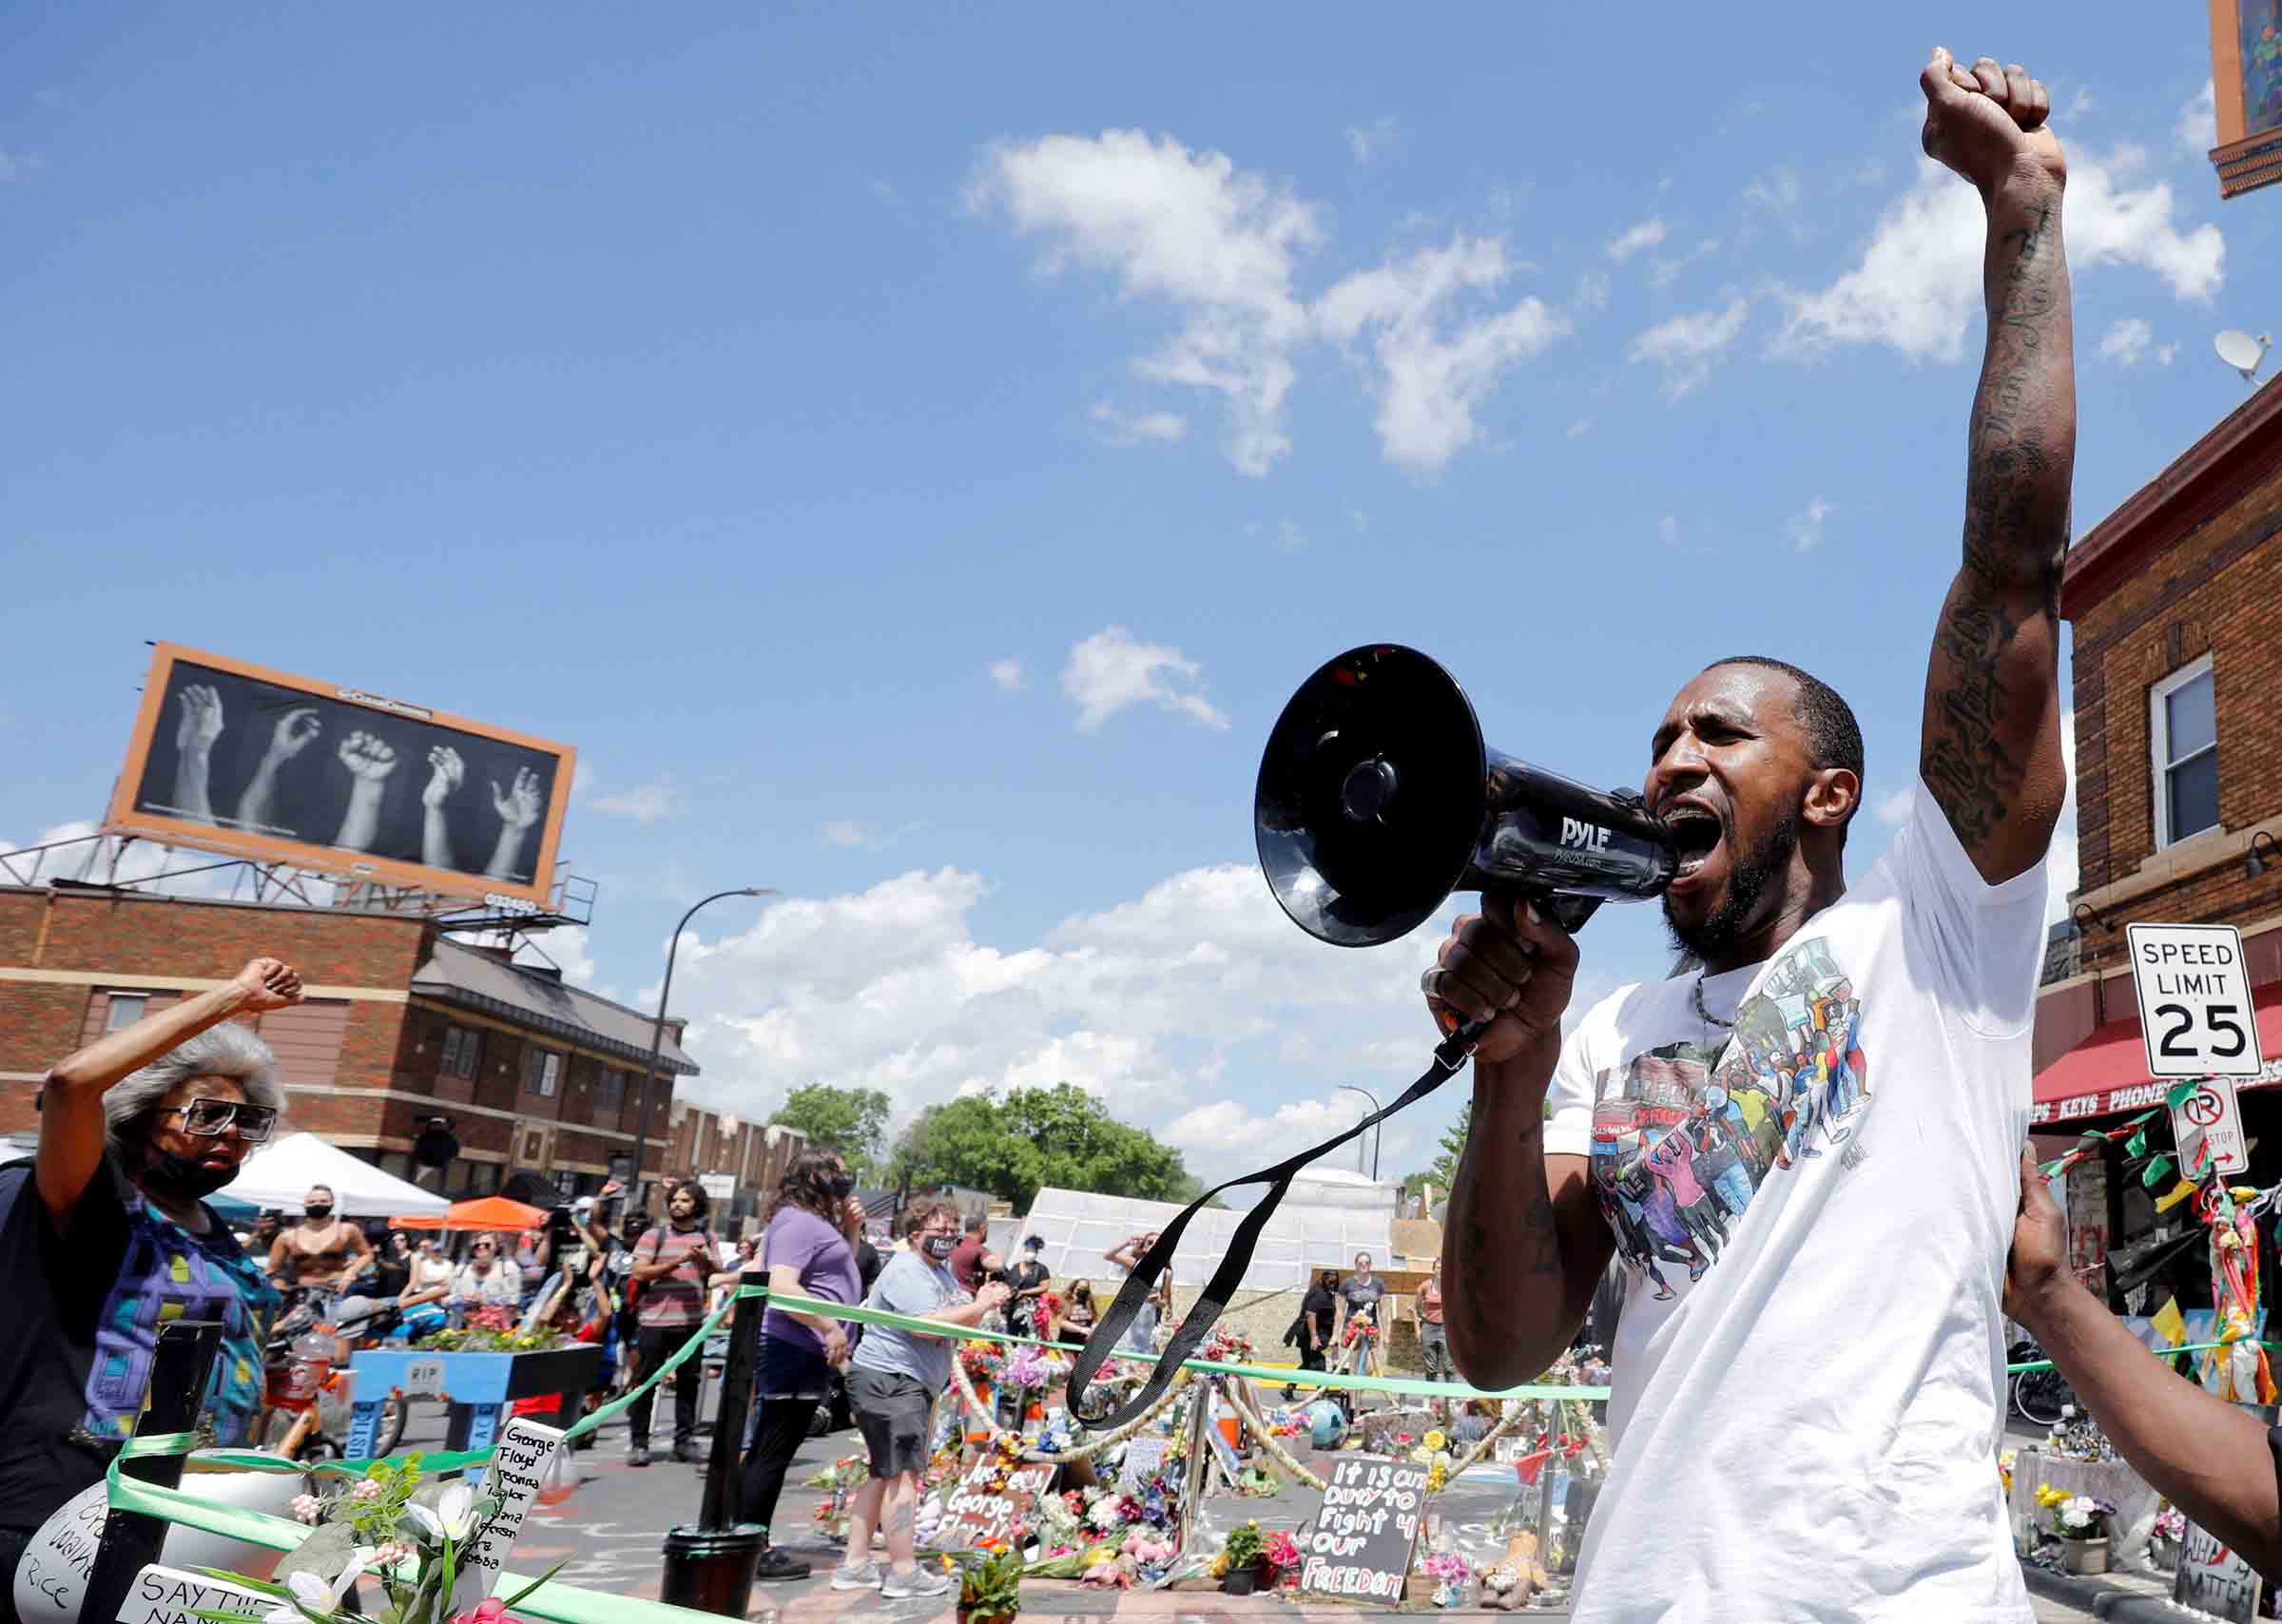 Community organizer Tommy McBrayer Jr. leads a chant in solidarity with George Floyd on the first anniversary of his death, at George Floyd Square in Minneapolis, on May 25, 2021. (Nicholas Pfosi—Reuters)